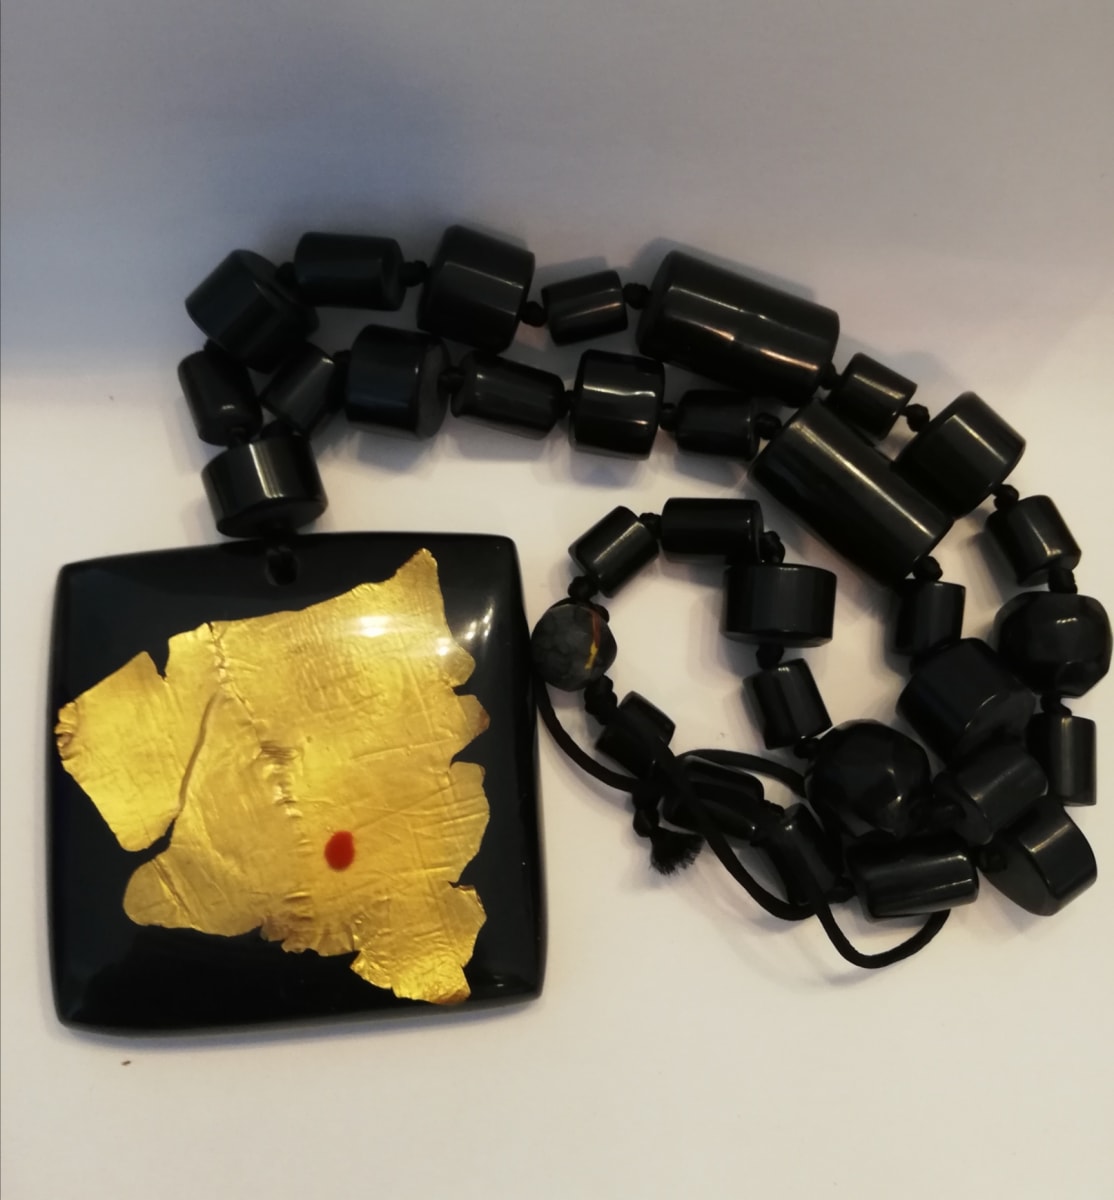 Black Square Pendant with 24 Karat gold leaf inlay, on tube bead necklace.  Image: Black Square Pendant with 24 Karat gold leaf inlay, on tube bead necklace.